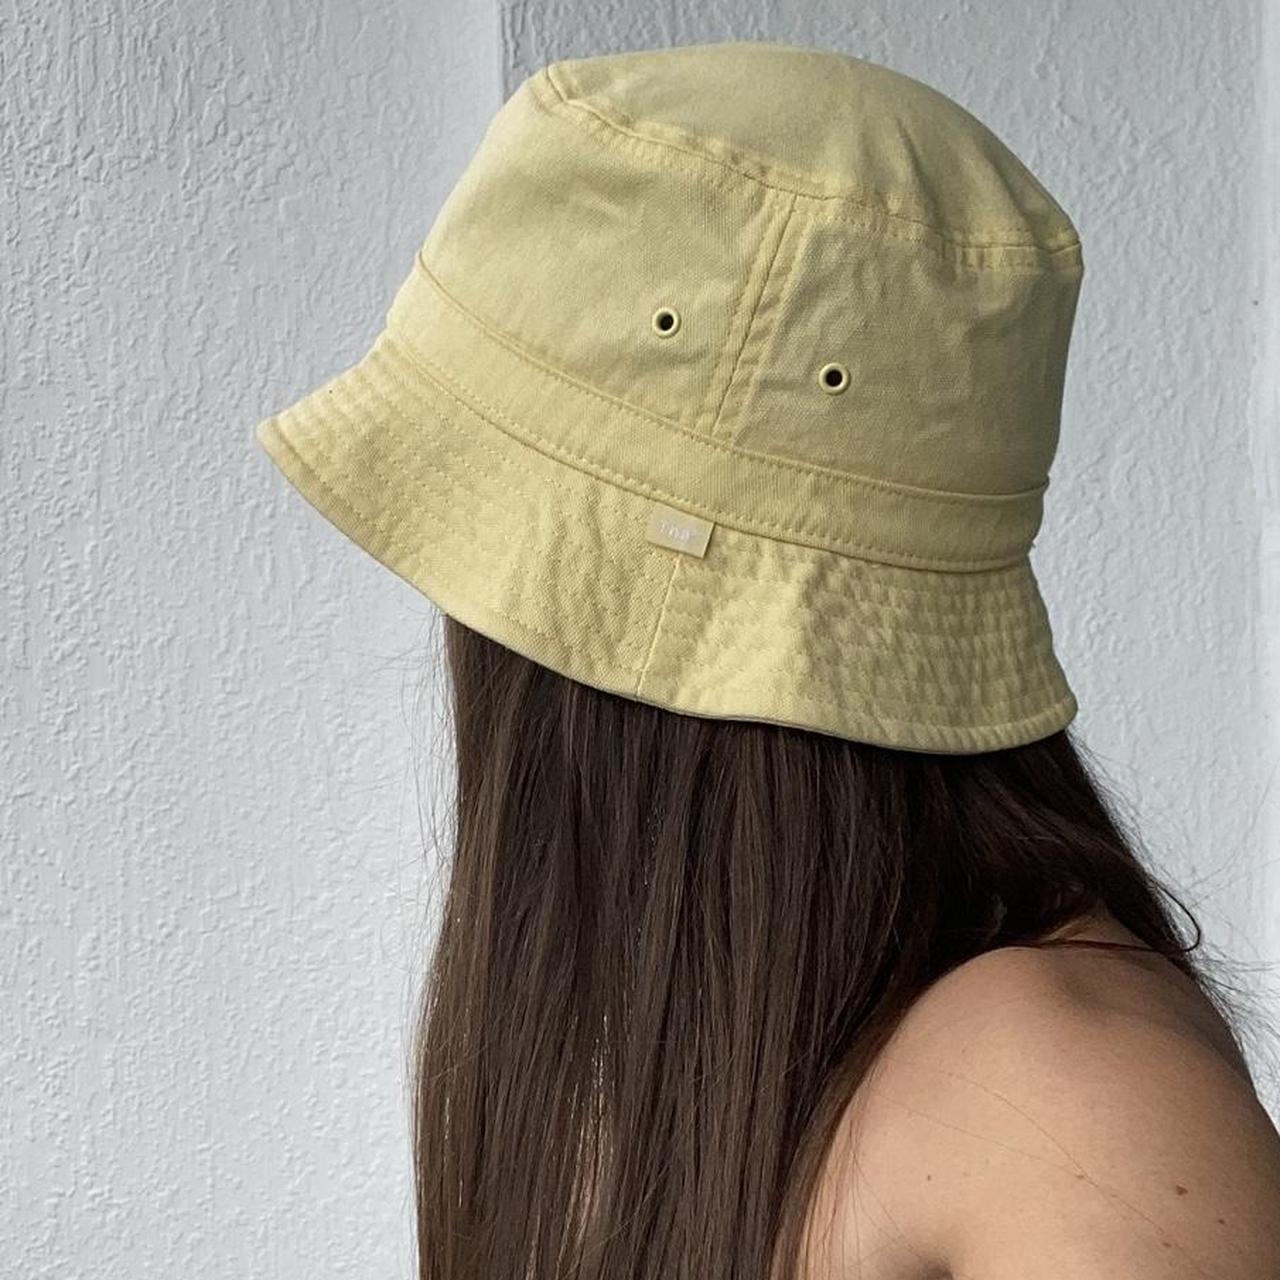 TNA Pastel Butter Yellow Bucket Hat Sold at... - Depop